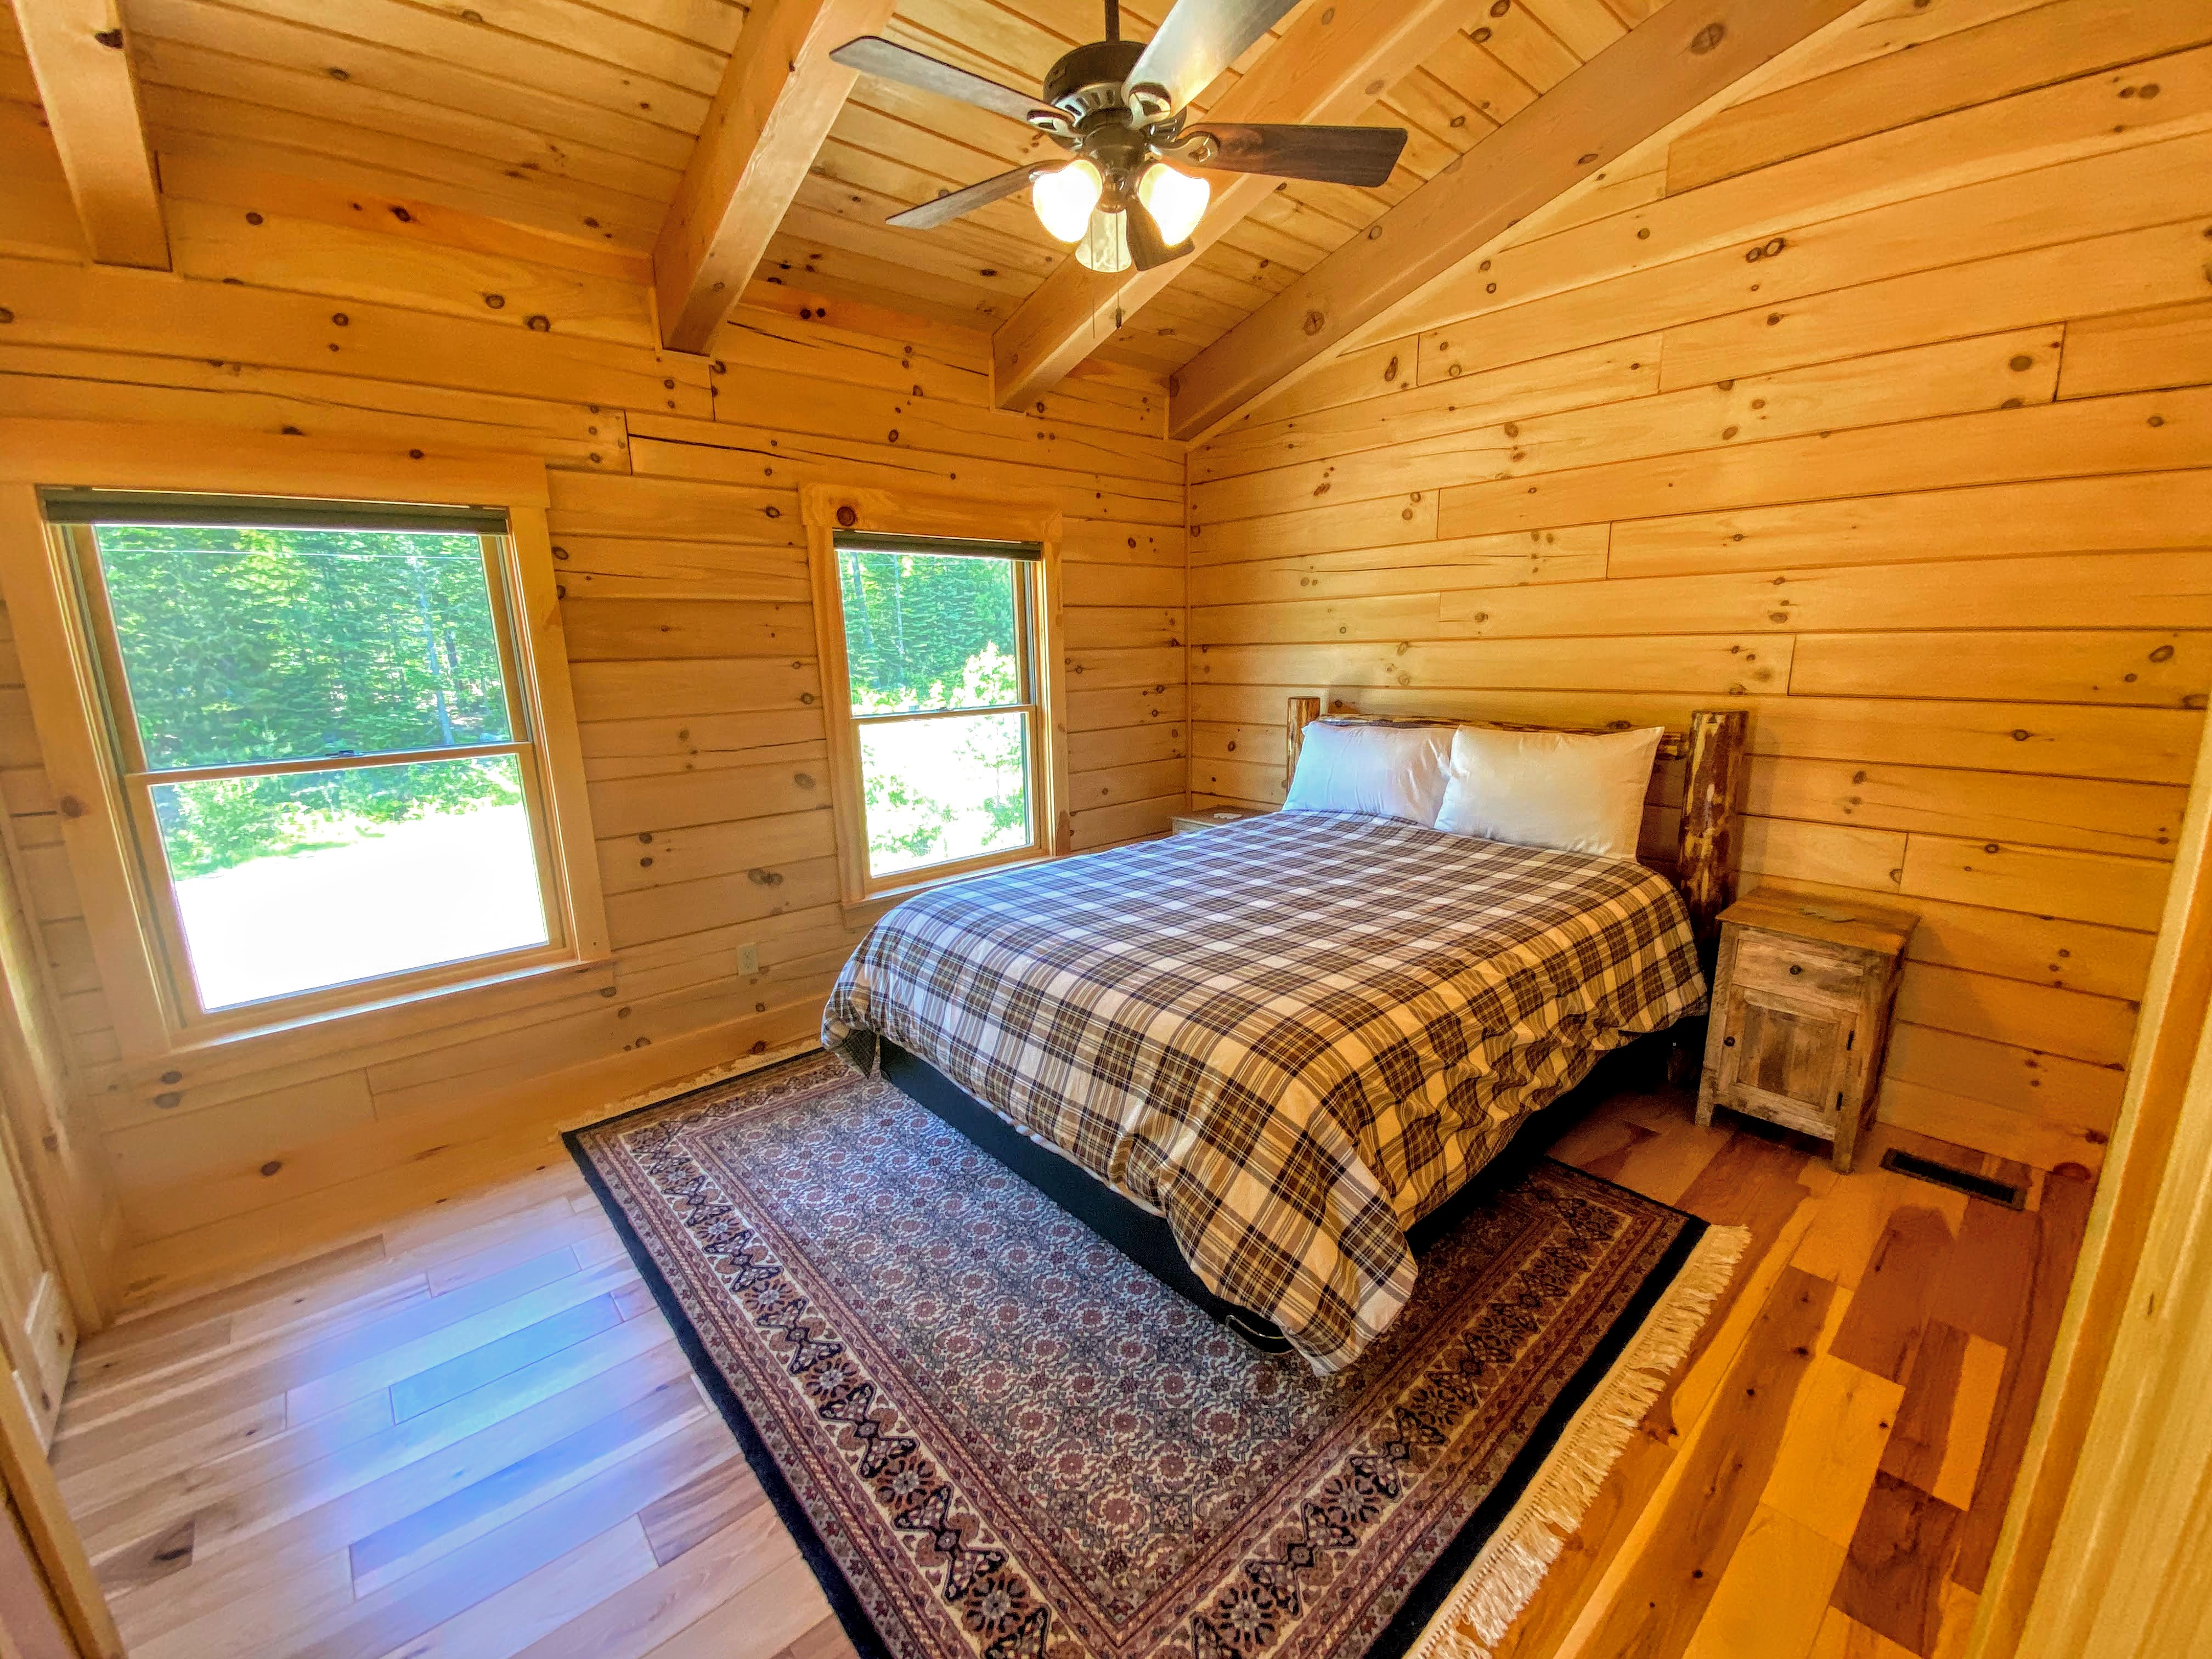 Guest Bedroom #2 is located on the second floor and features a Queen bed. Sleeps 2